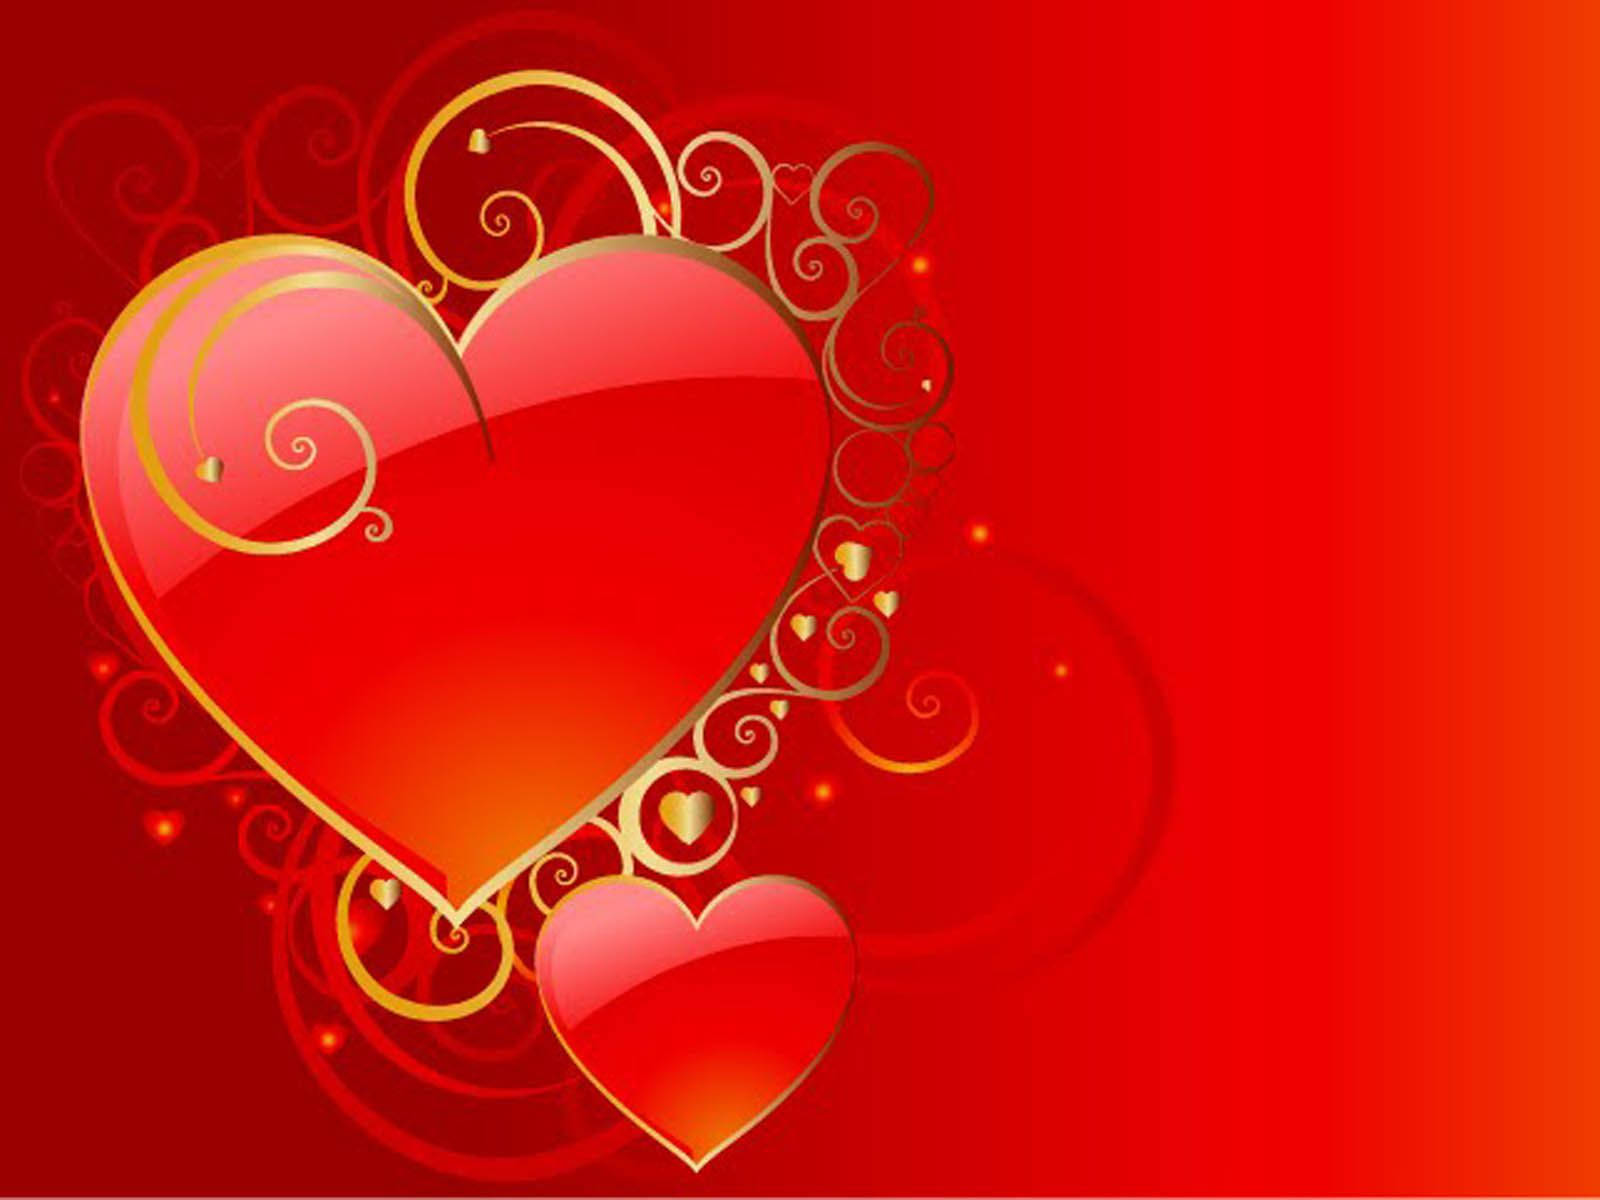 Red Love Heart Background Wallpaper